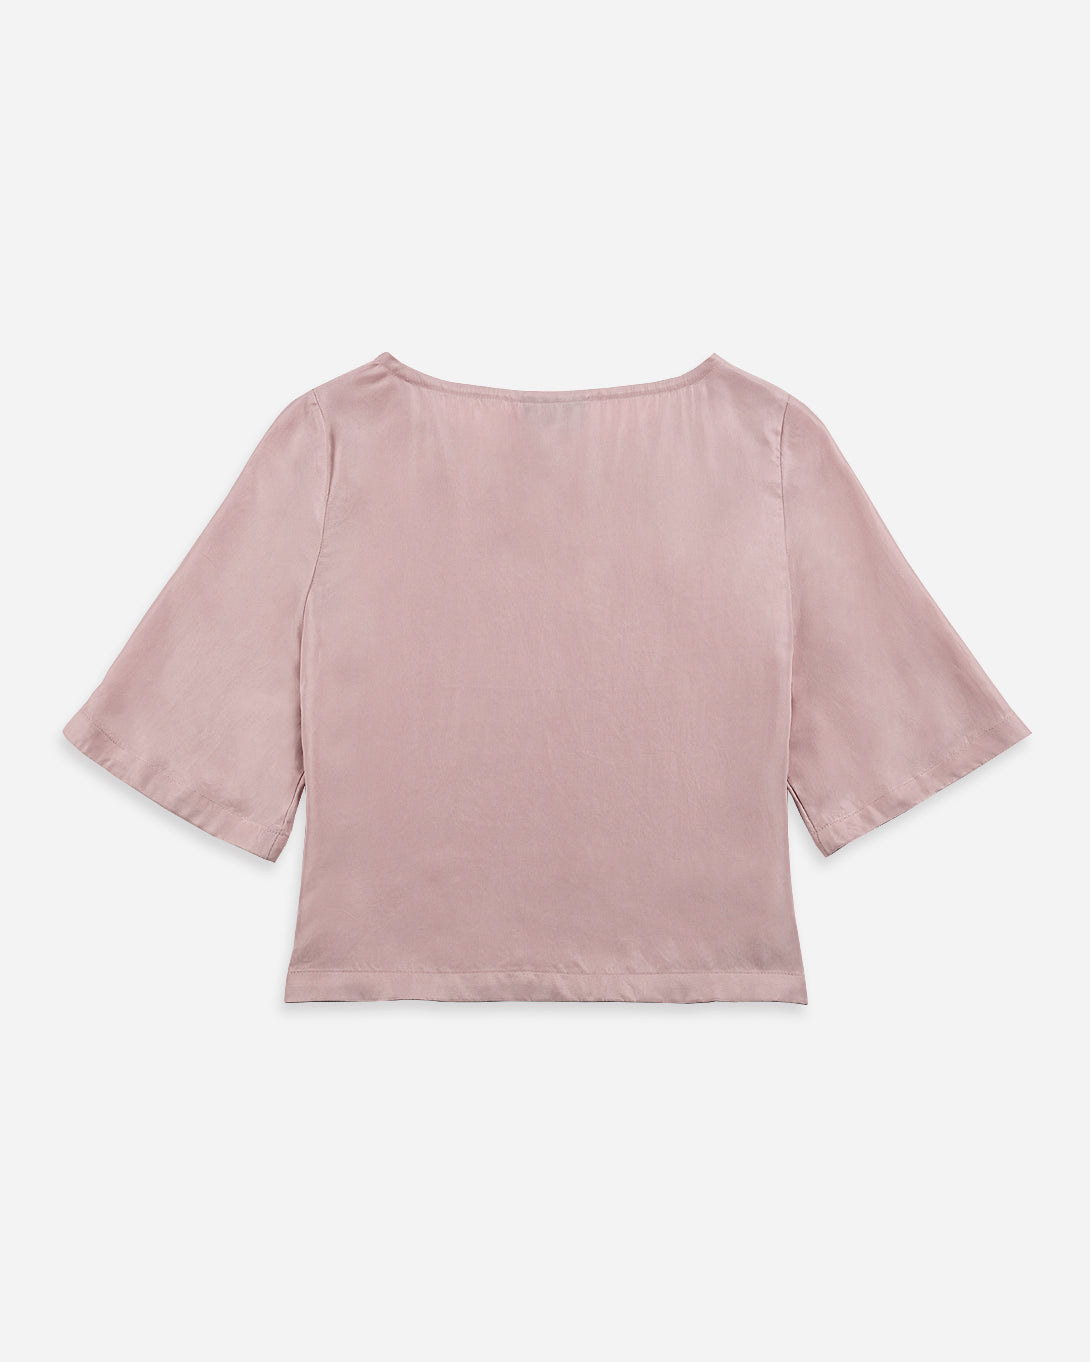 Evening Sand Fluid Boxy Top Womens Cropped Shirt